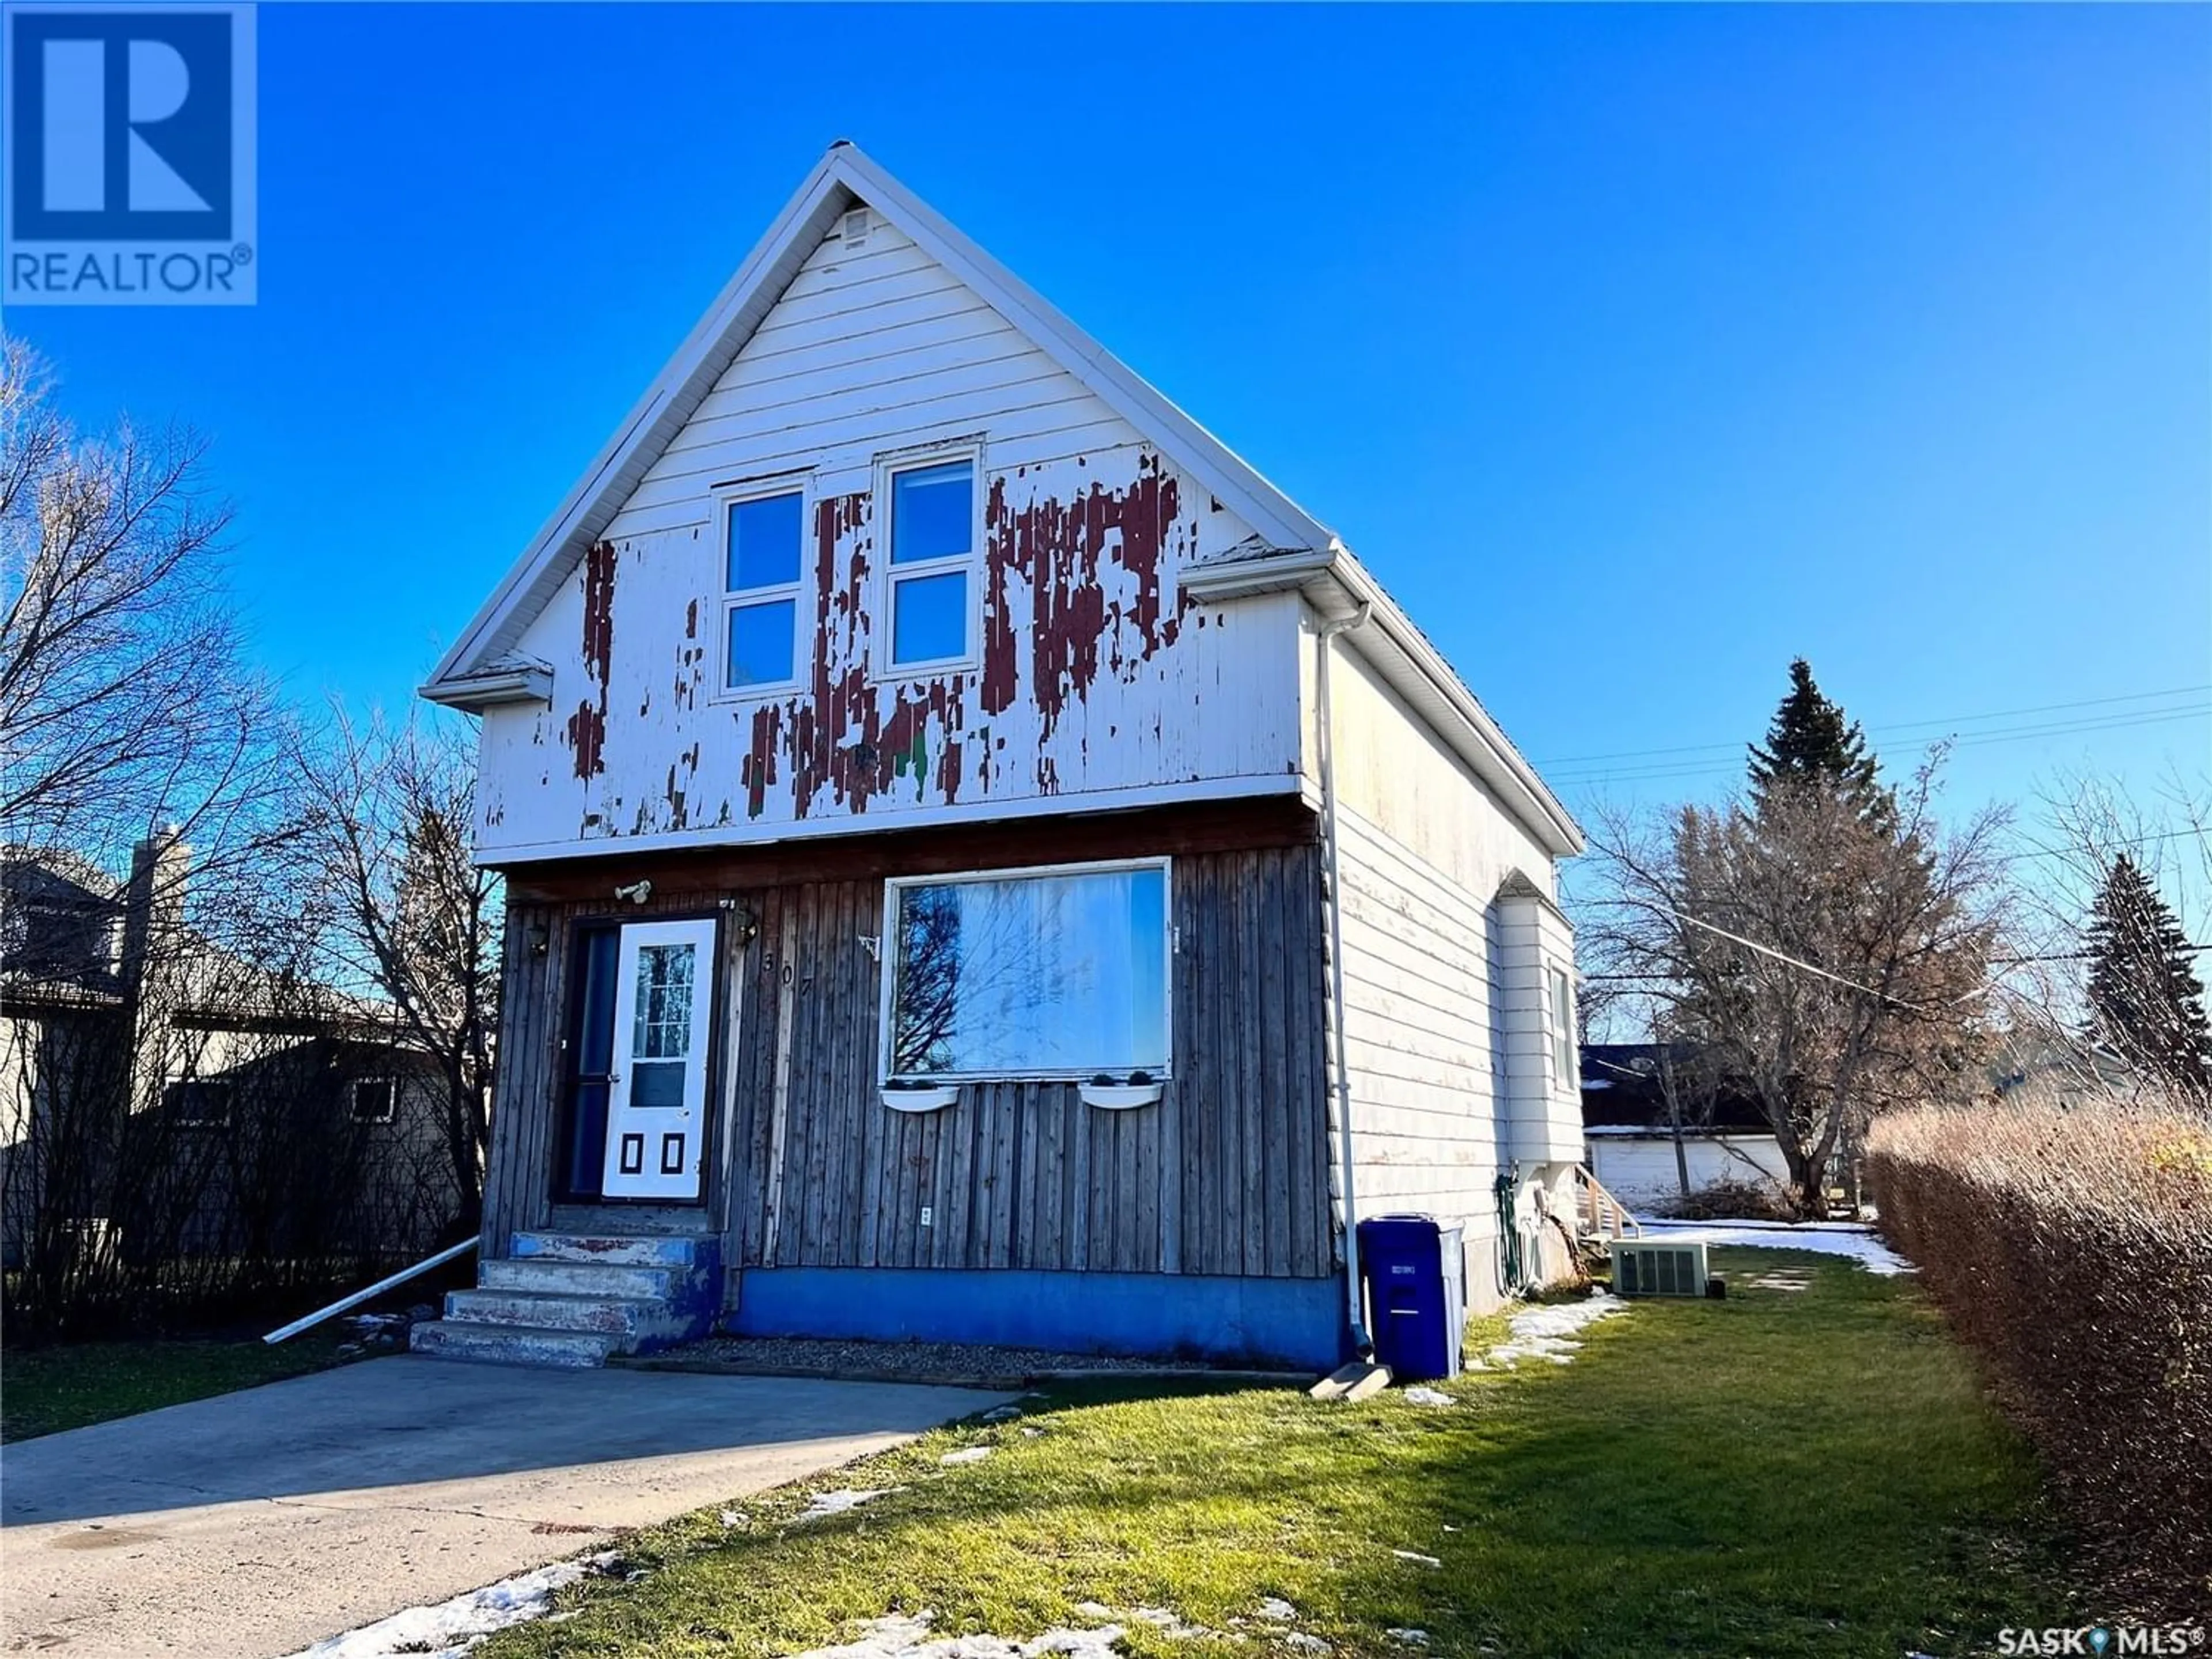 Home with unknown exterior material for 307 A AVENUE E, Wynyard Saskatchewan S0A4T0